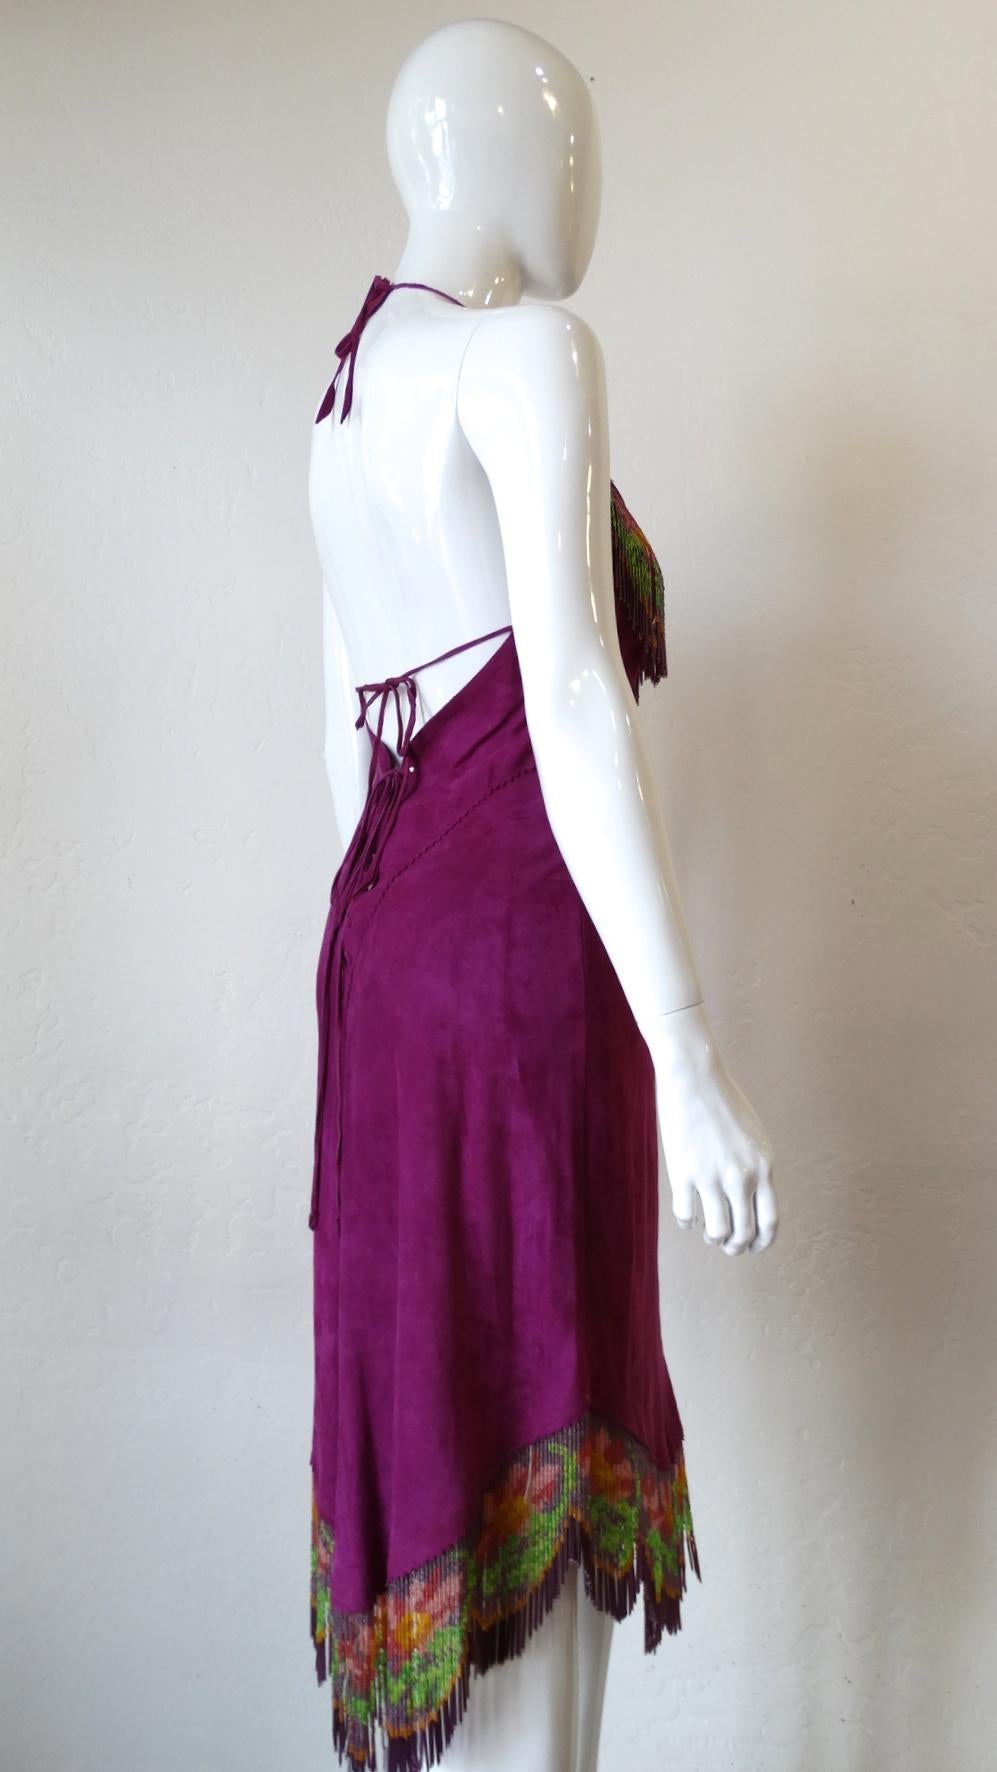 Pretty In Purple! Designed by Clifford Olson Leather, this purple suede bohemian style halter dress is decorated with beaded fringe which displays a floral motif across the top and bottom hem. Turn this number around to find a beautiful lace up tie